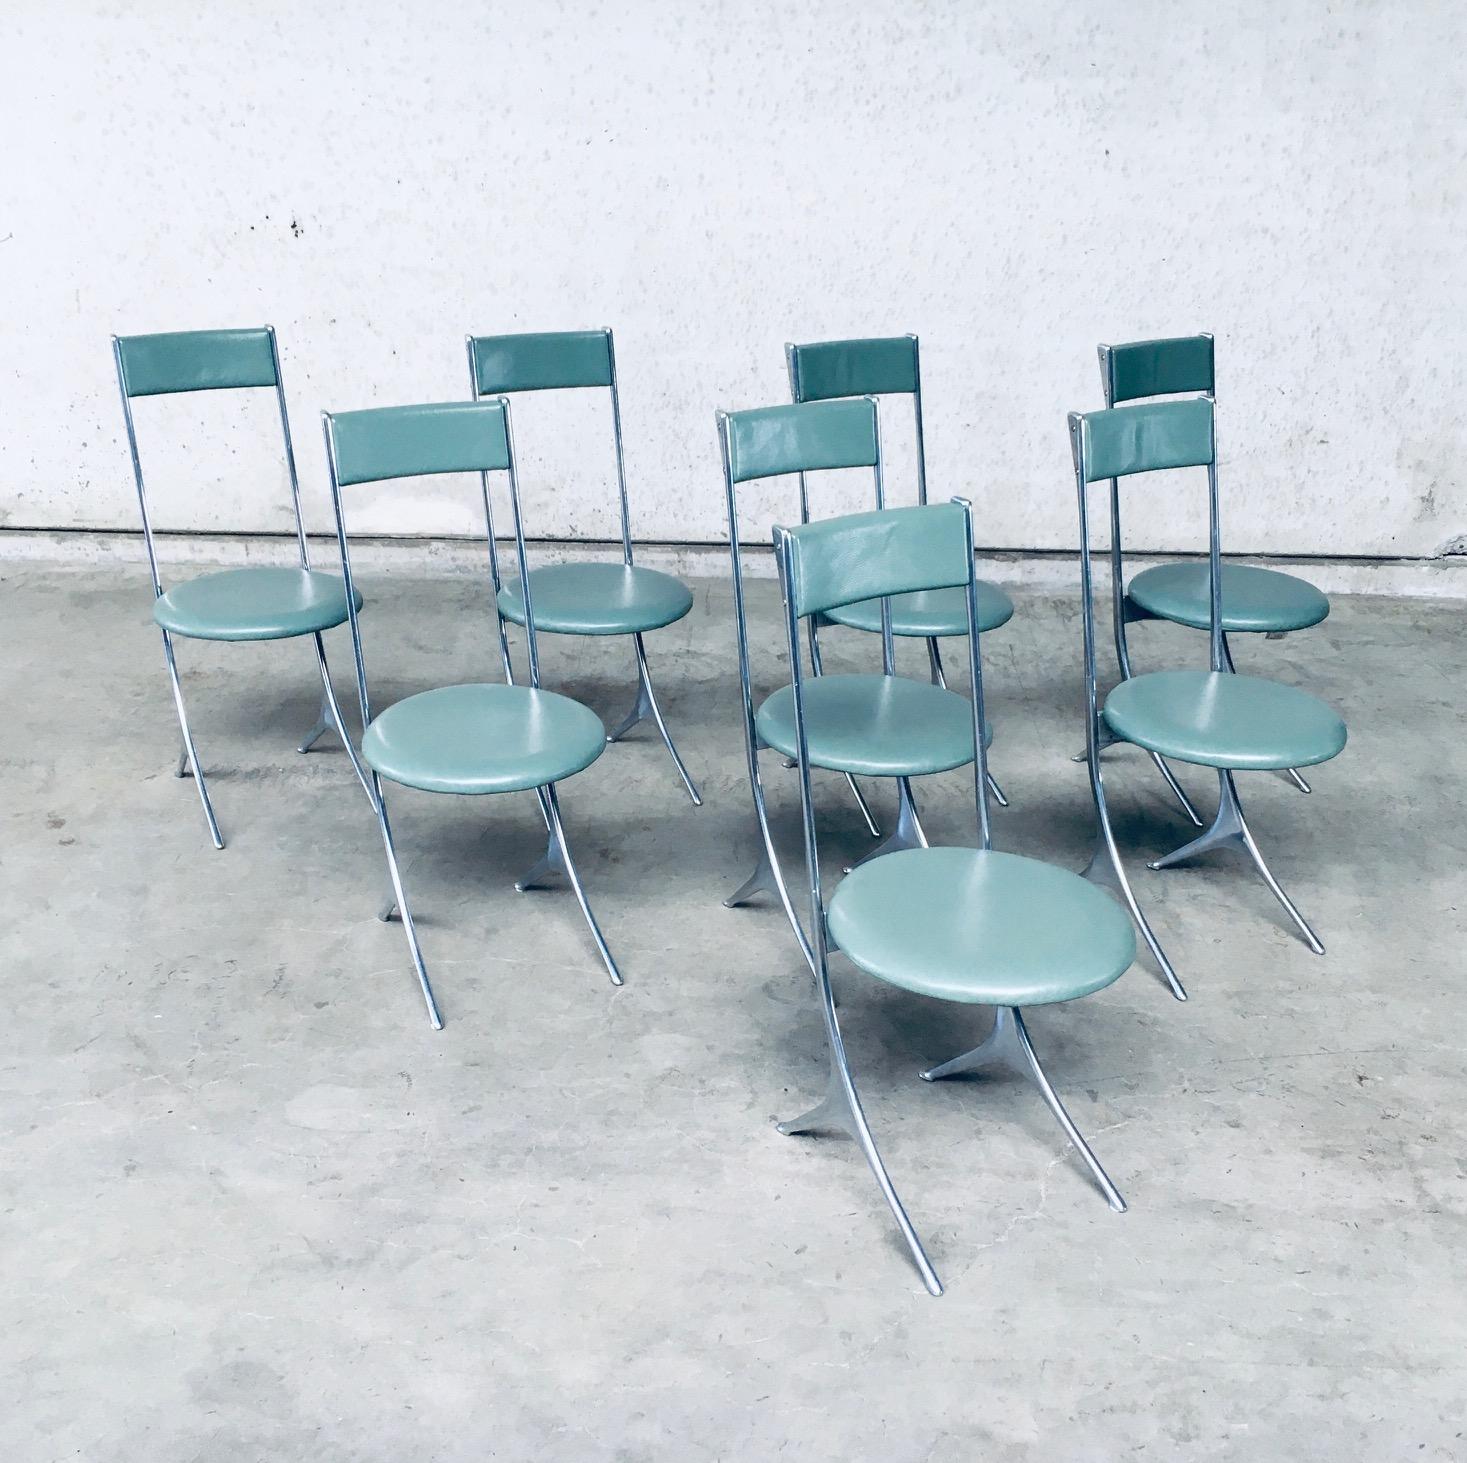 Vintage original Postmodern Design set of 8 Dining Chairs in marine green leather by Zanotta, made in Italy circa 1985. This turqoise marine green leather dining chair has a formed aluminium metal frame in classic Philippe Starck style. In near